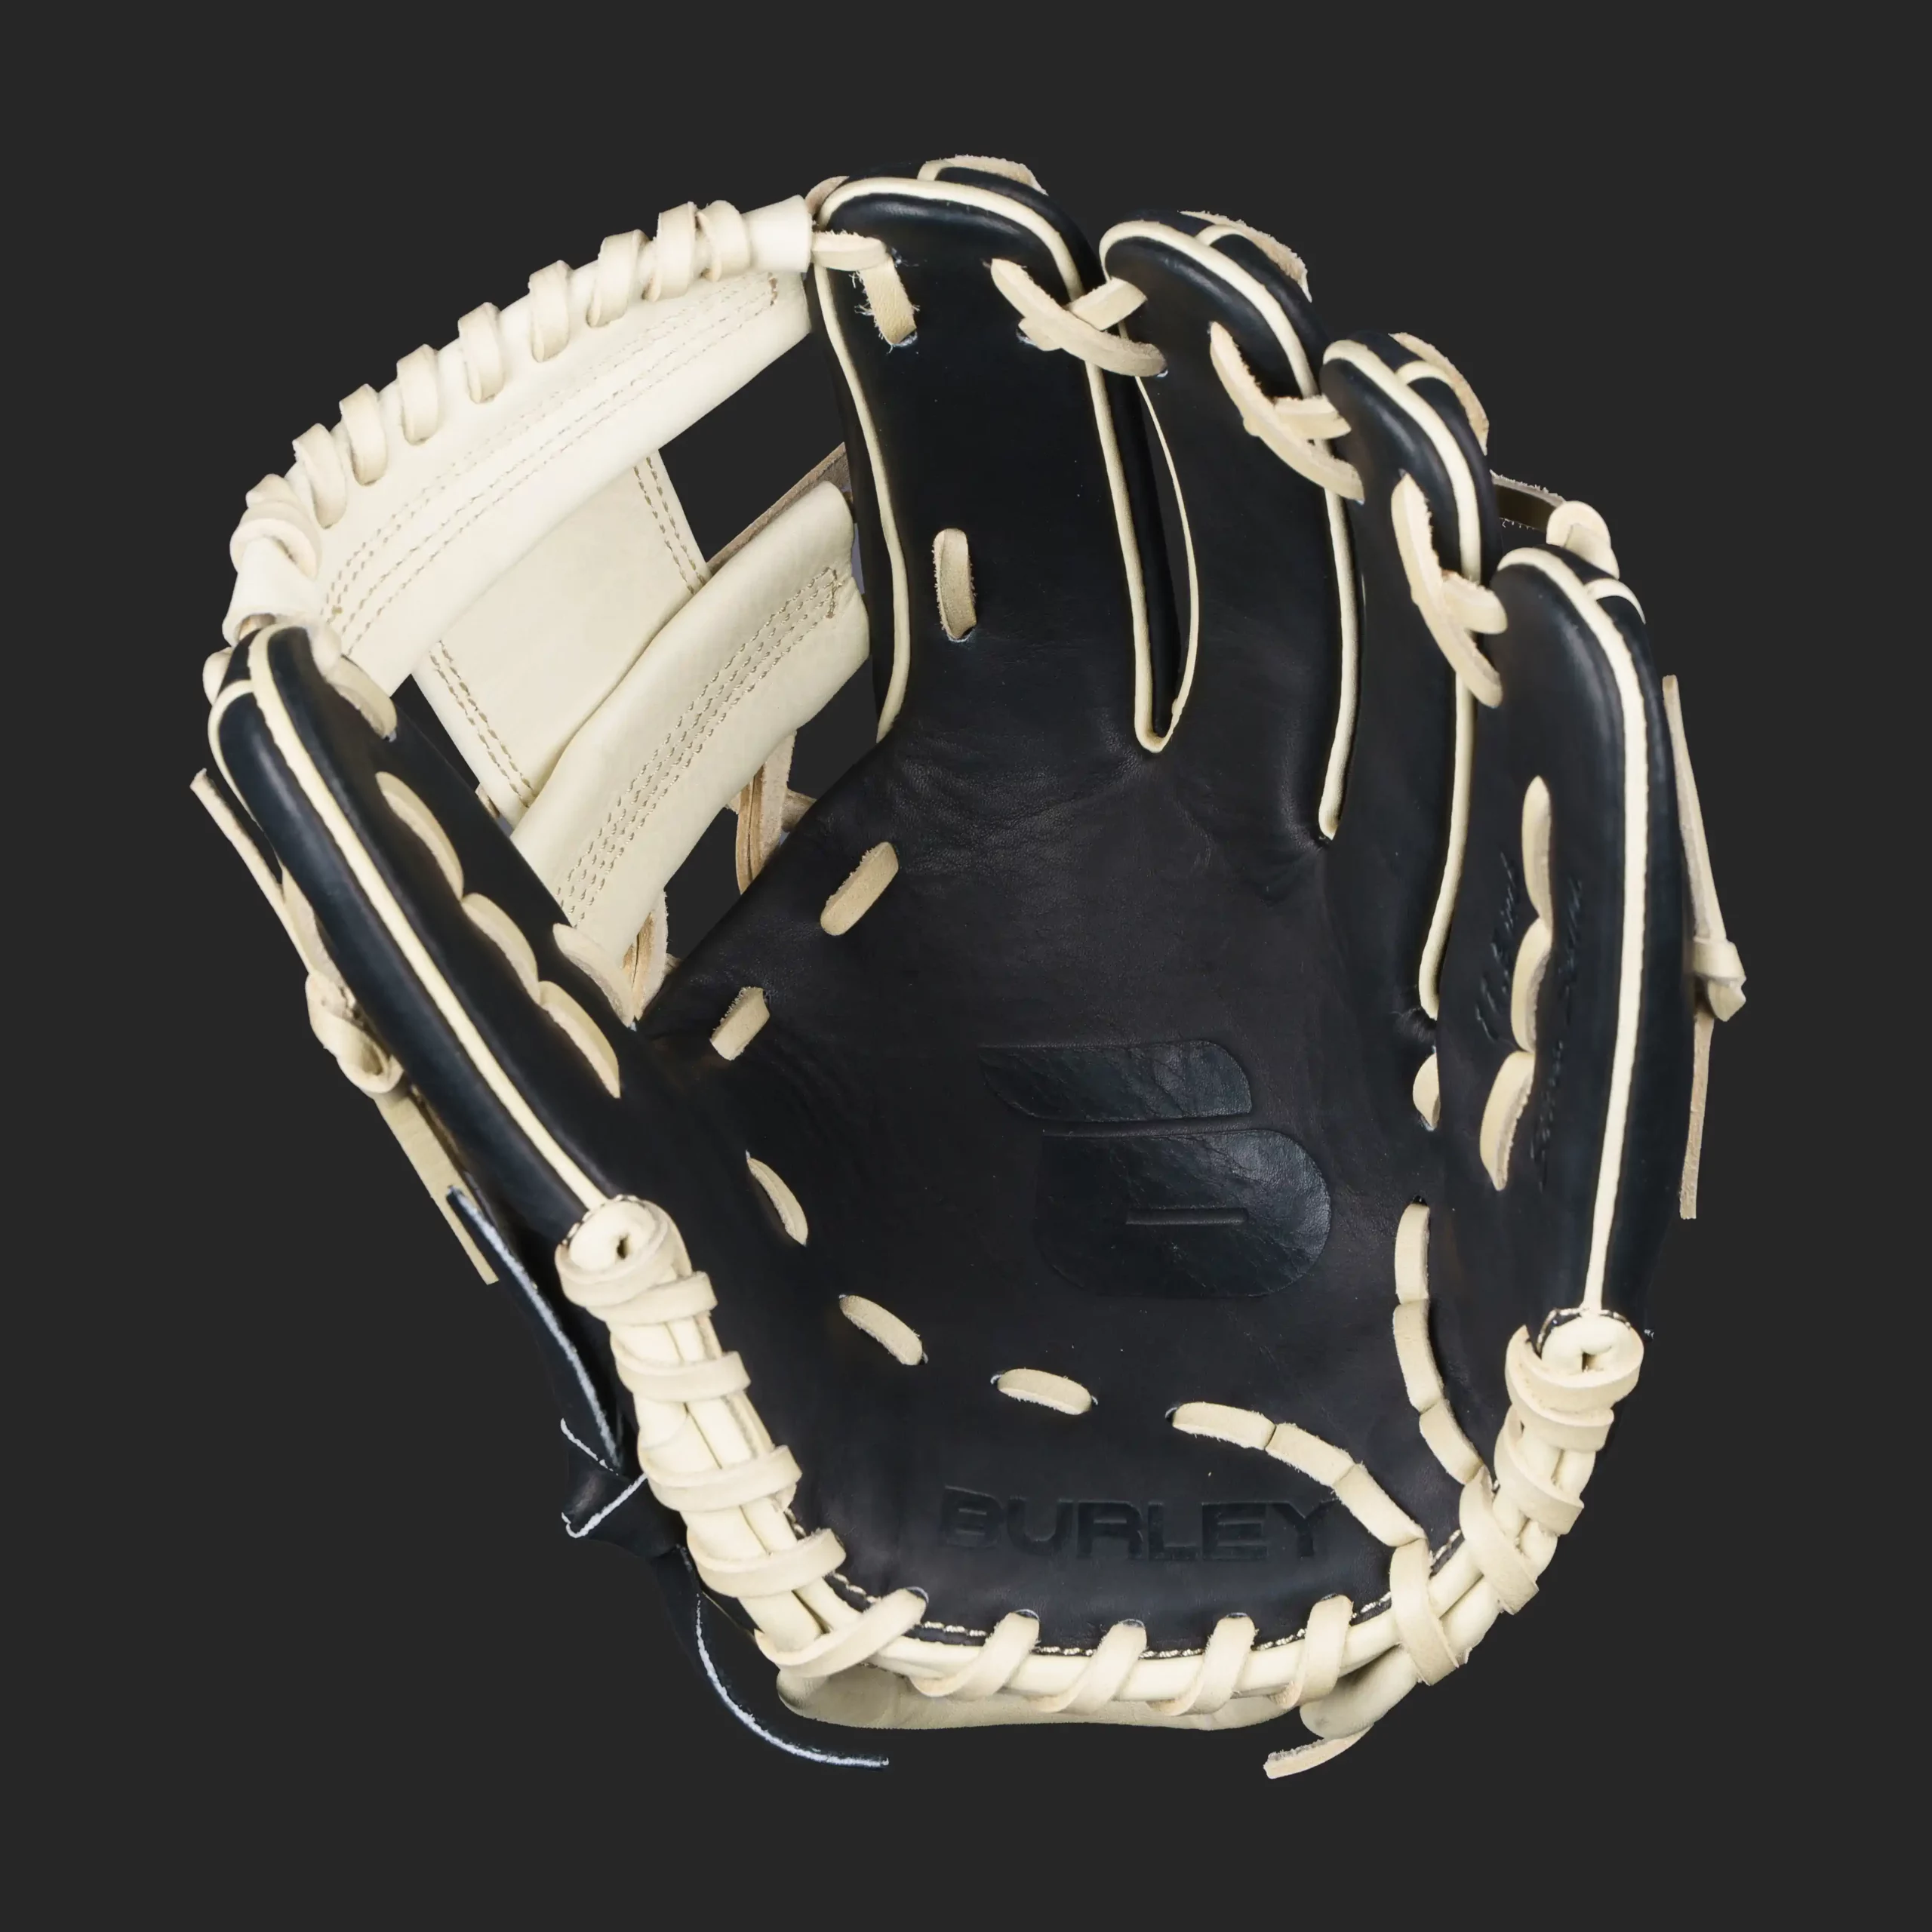 silver series infield glove black blonde i web right 1